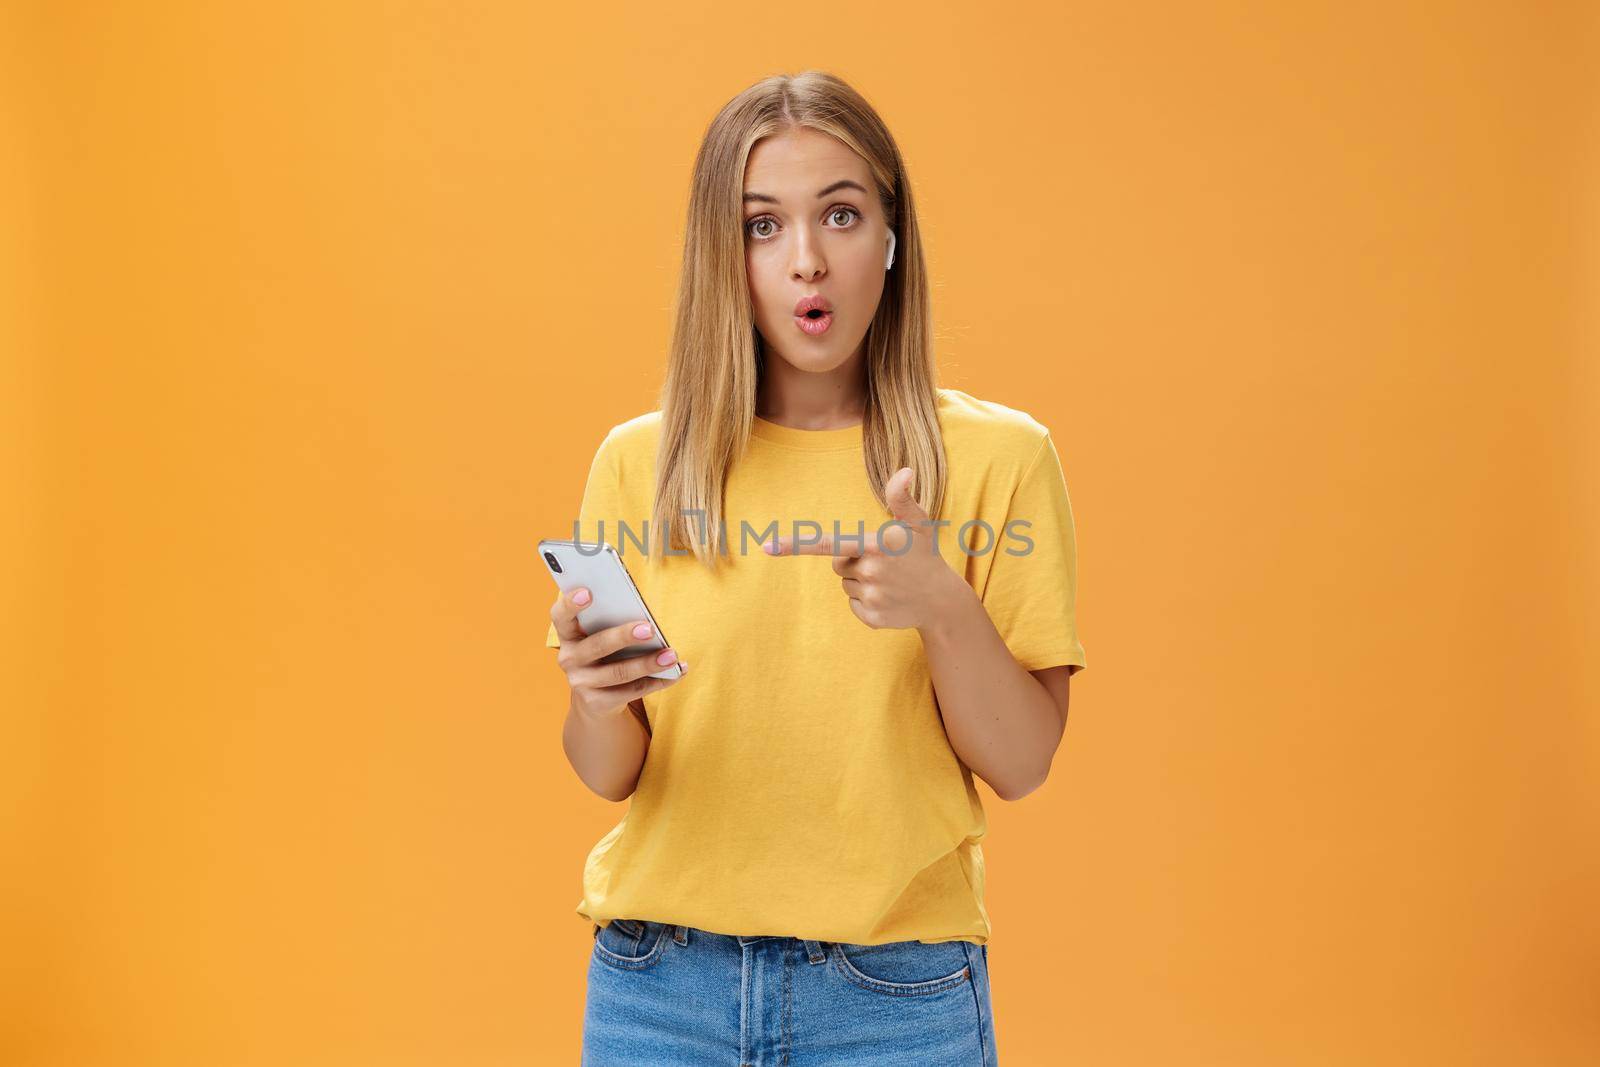 Wman impressed by wireless earphones connecting to smartphone themselves pointing at device screen questioned and surprised folding lips looking intrigued at camera wearing earbuds over orange wall. Technology and advertisement concept